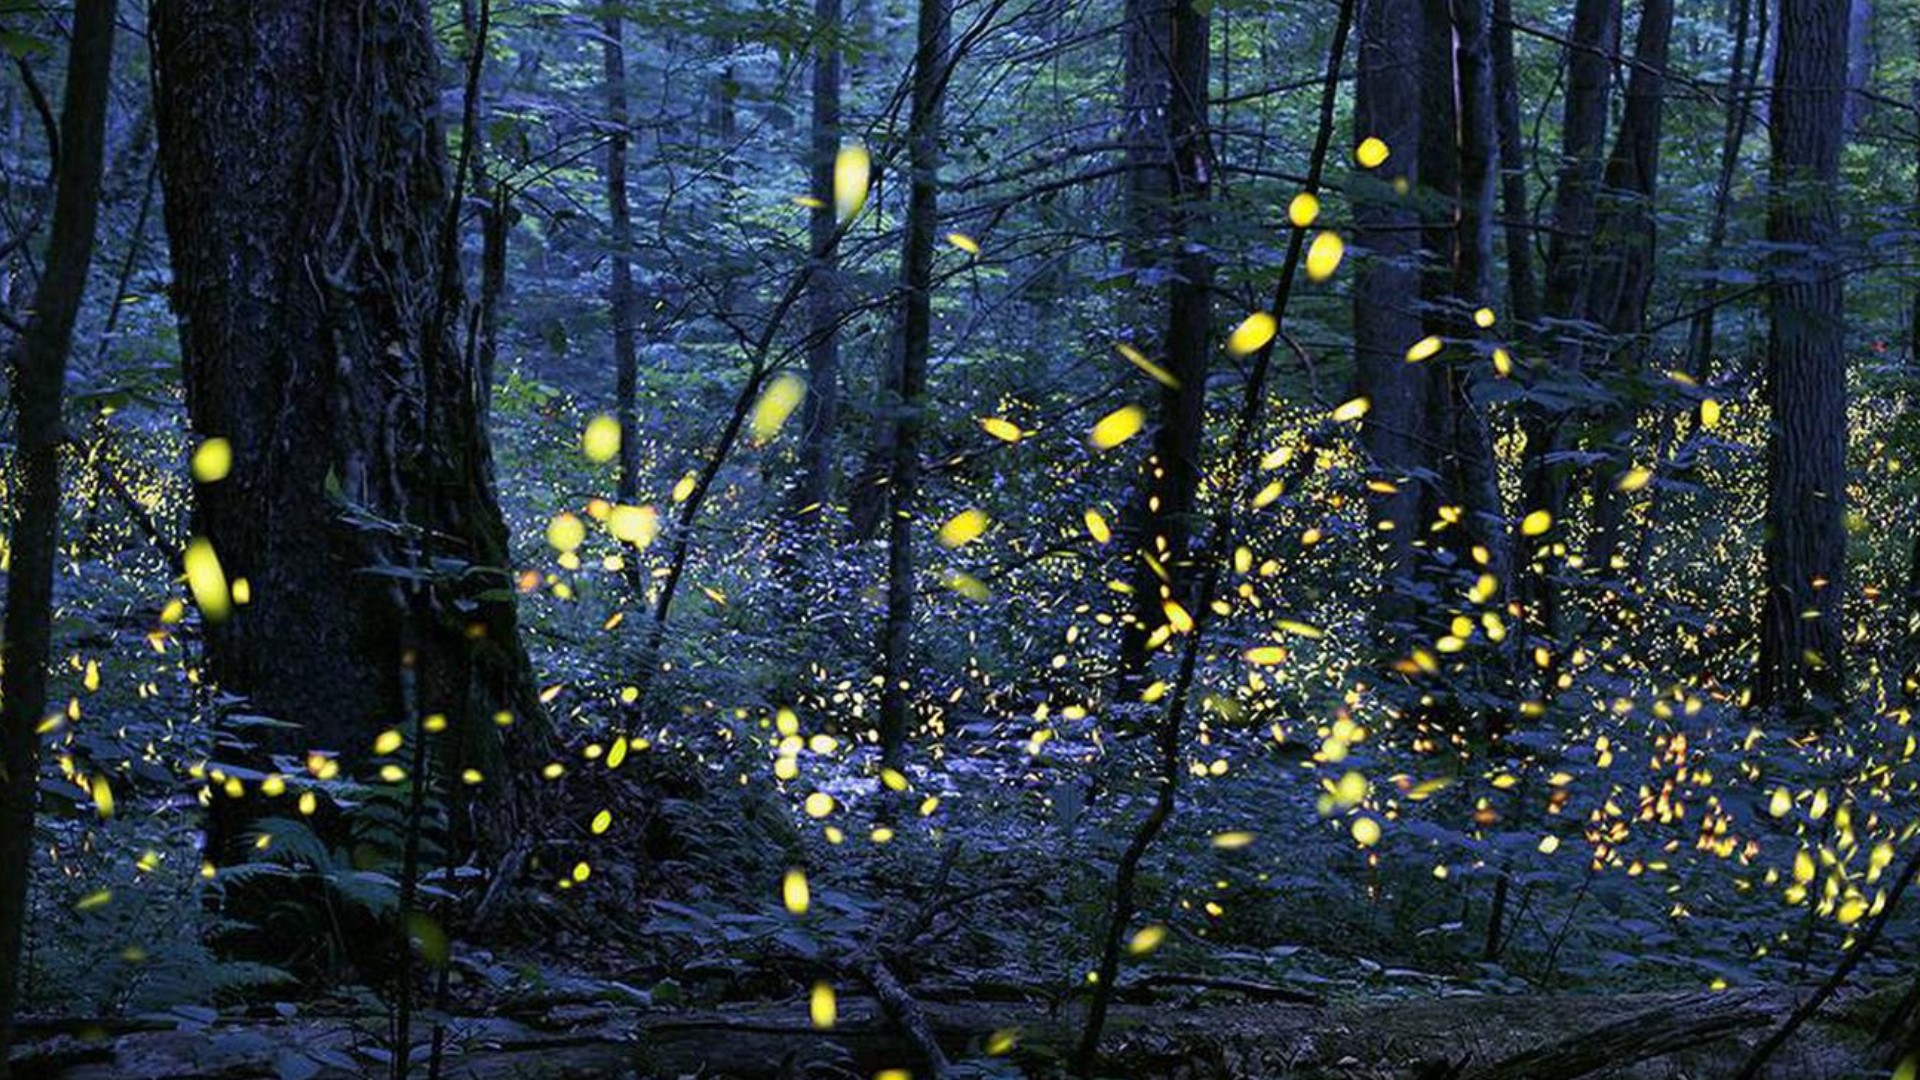 From the WBIR archives in June 2018, expert Lynn Faust explains how to predict when synchronous fireflies will emerge, and why the guess-work is always a gamble.